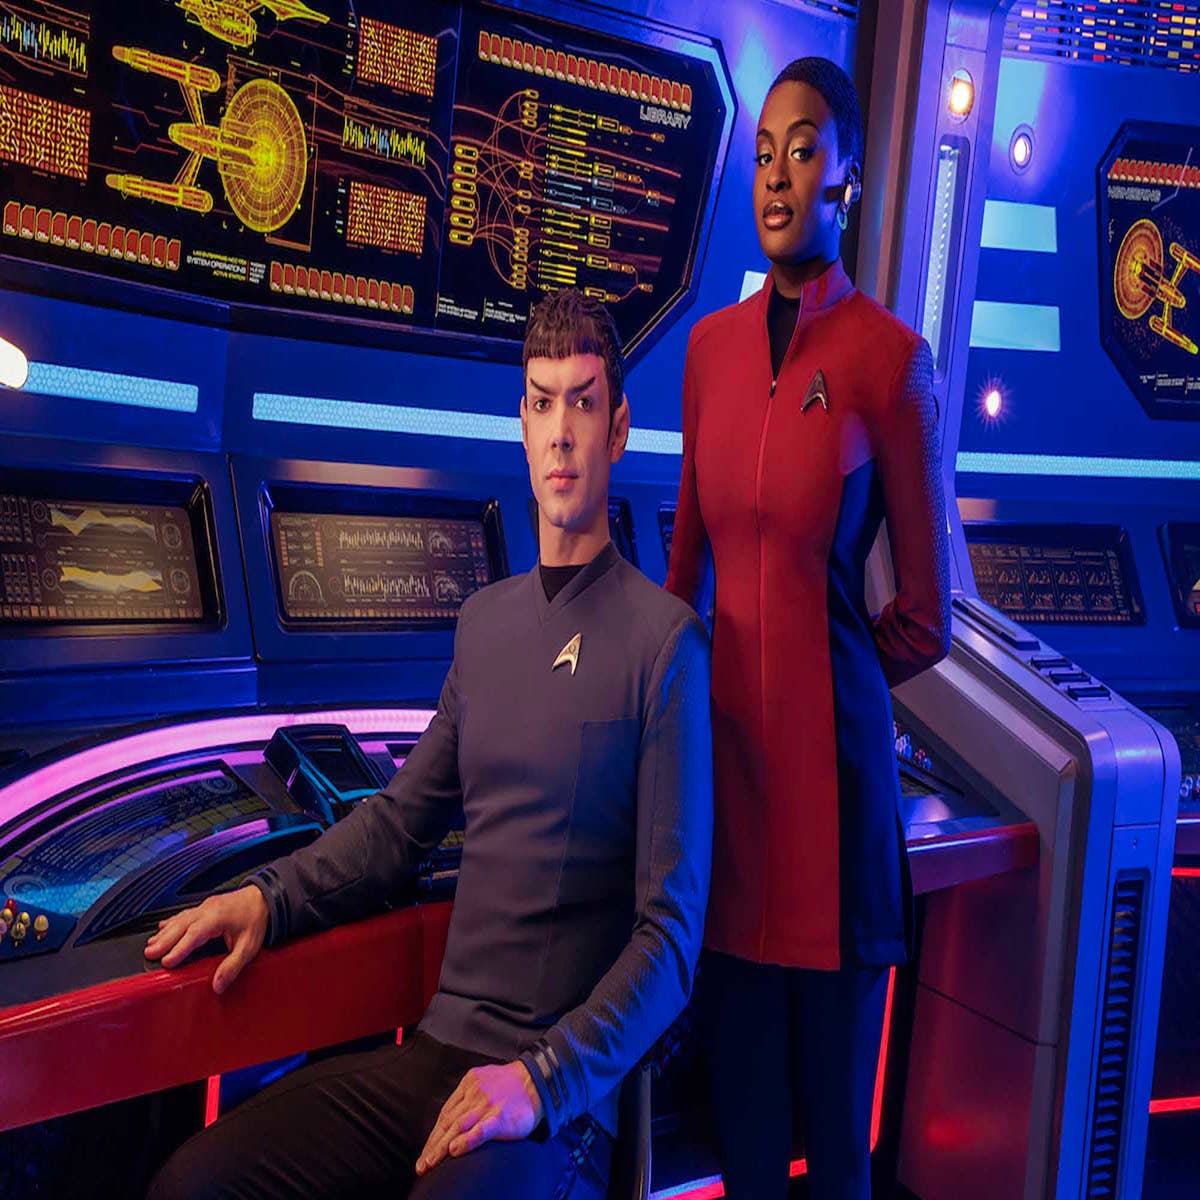 How to Watch Every Star Trek Movie and TV Show in Order